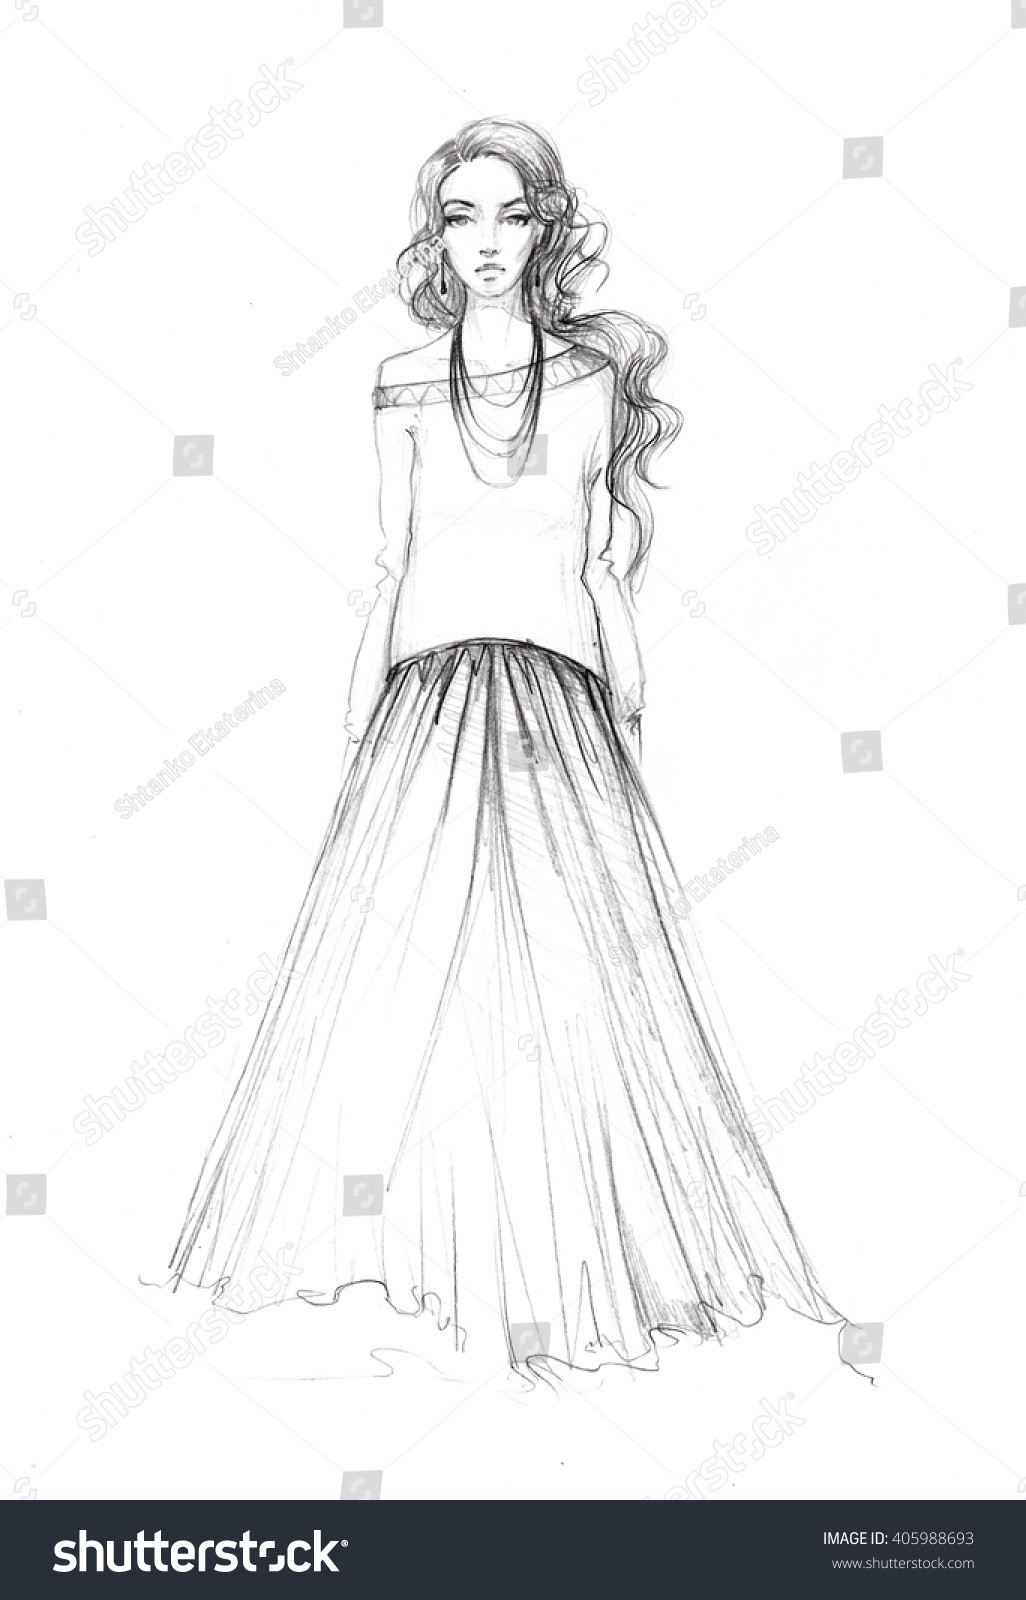 Easy Fashion Sketches at PaintingValley.com | Explore collection of ...